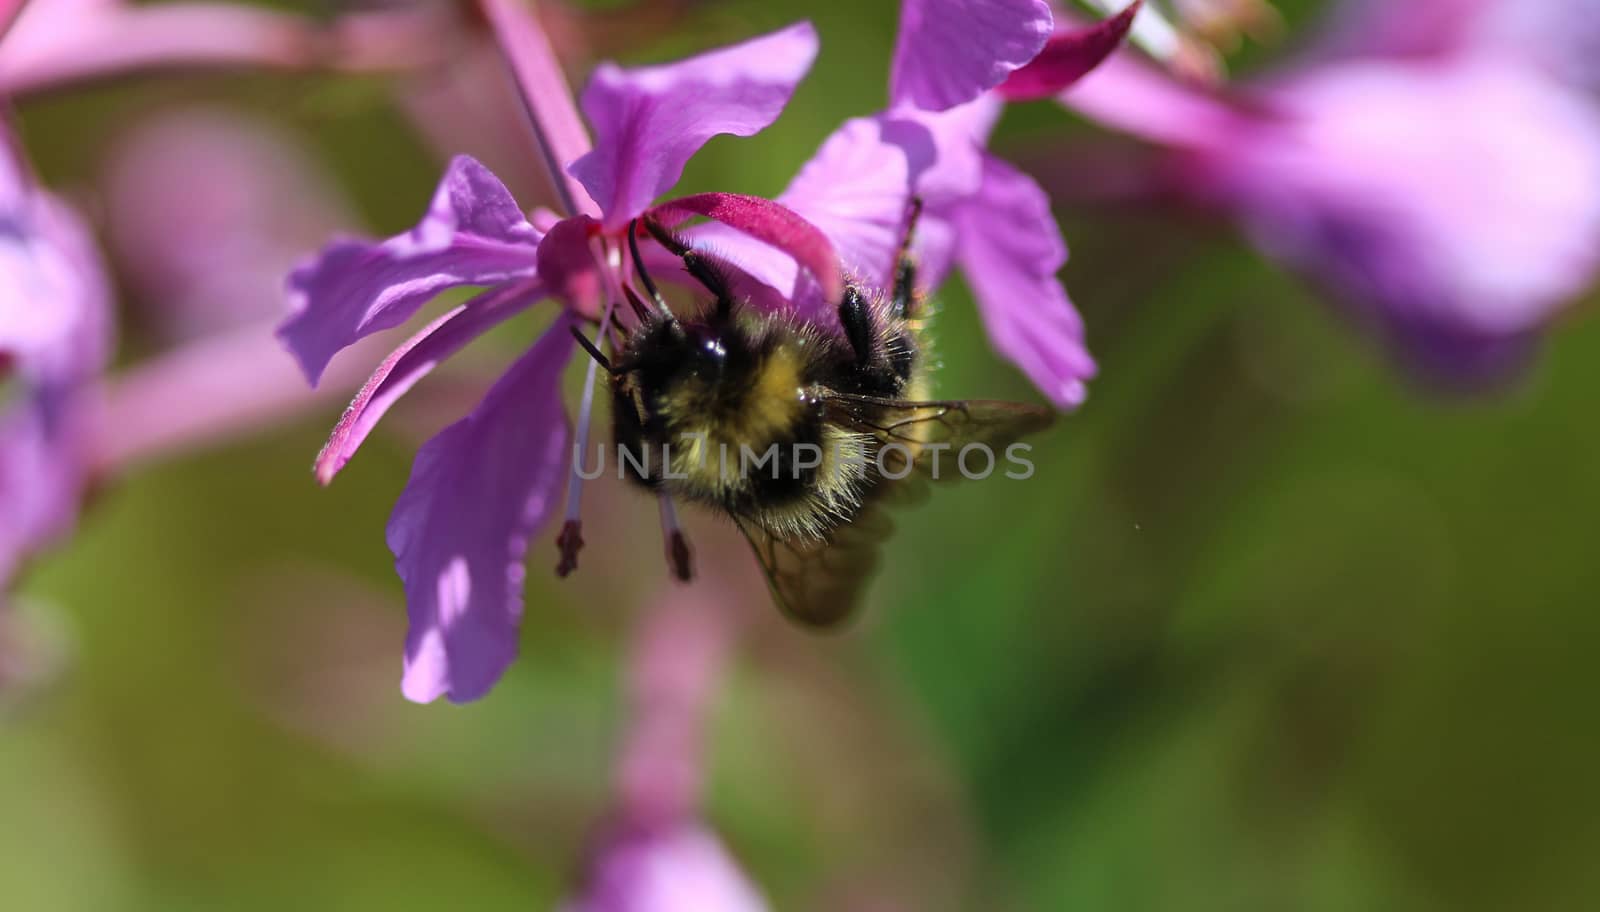 Close up of Bombus campestris, a common cuckoo bumblebee